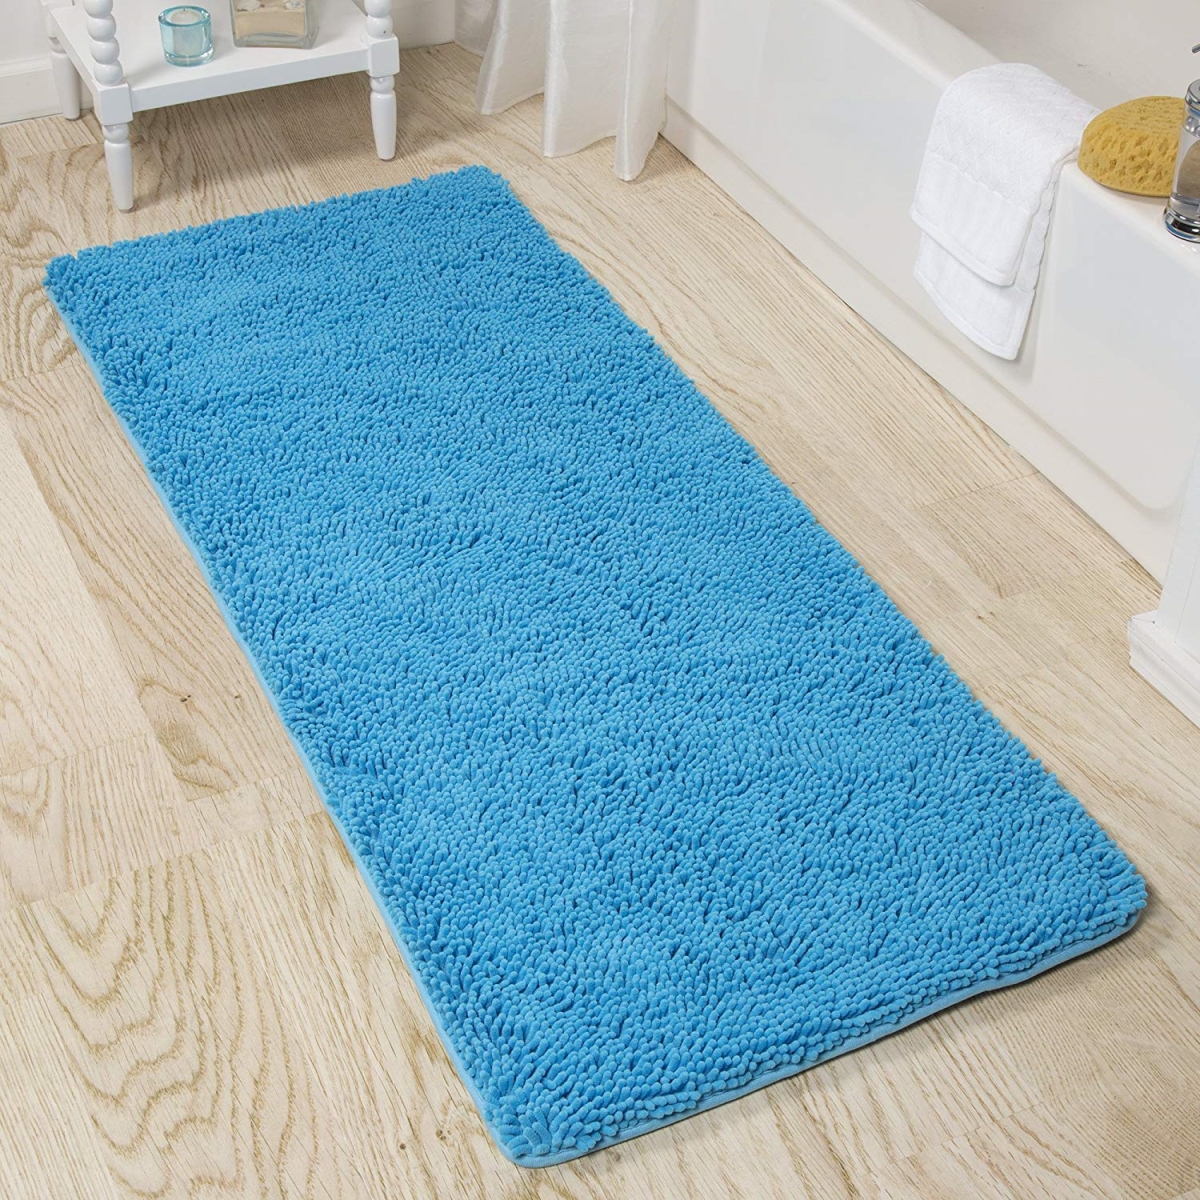 Picture of Bedford Home 67A-99063 Memory Foam Shag Bath Mat, 2 ft. by 5 ft. - Blue